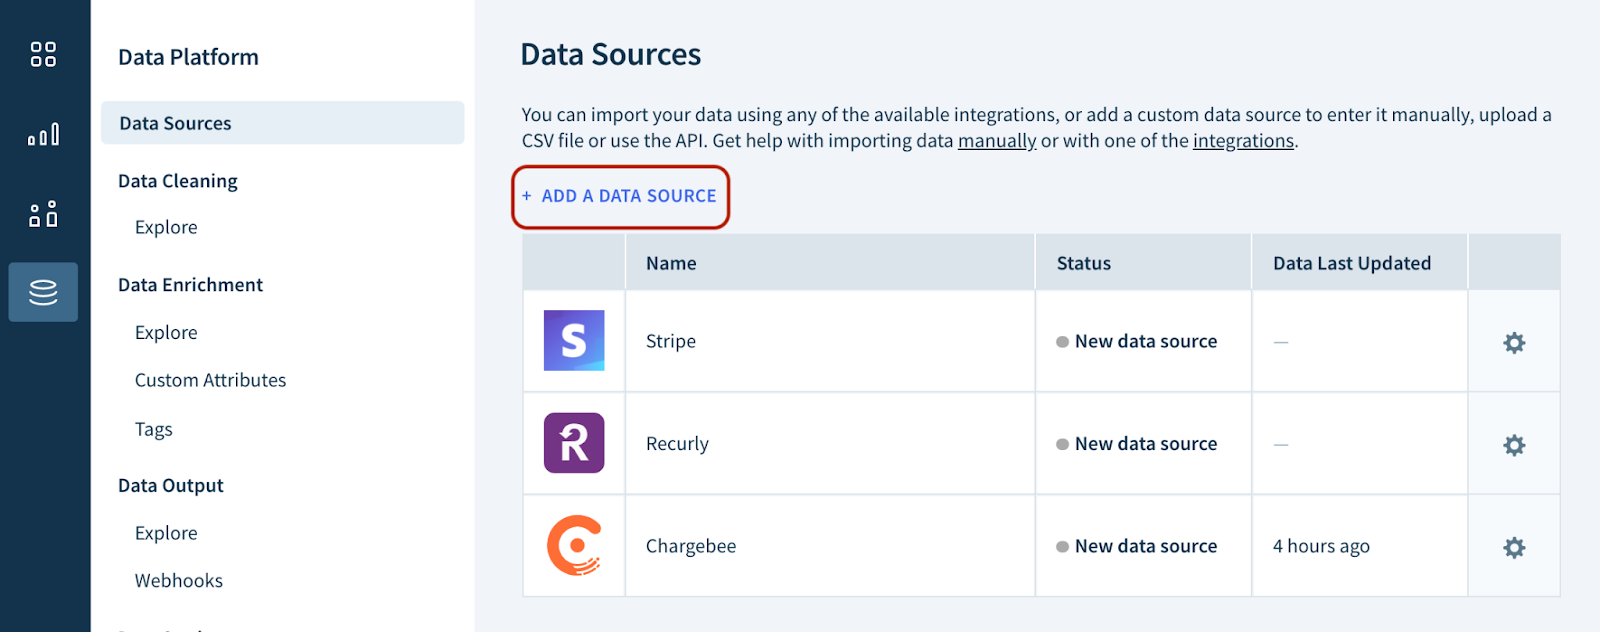 Screenshot of the Data Sources page as described